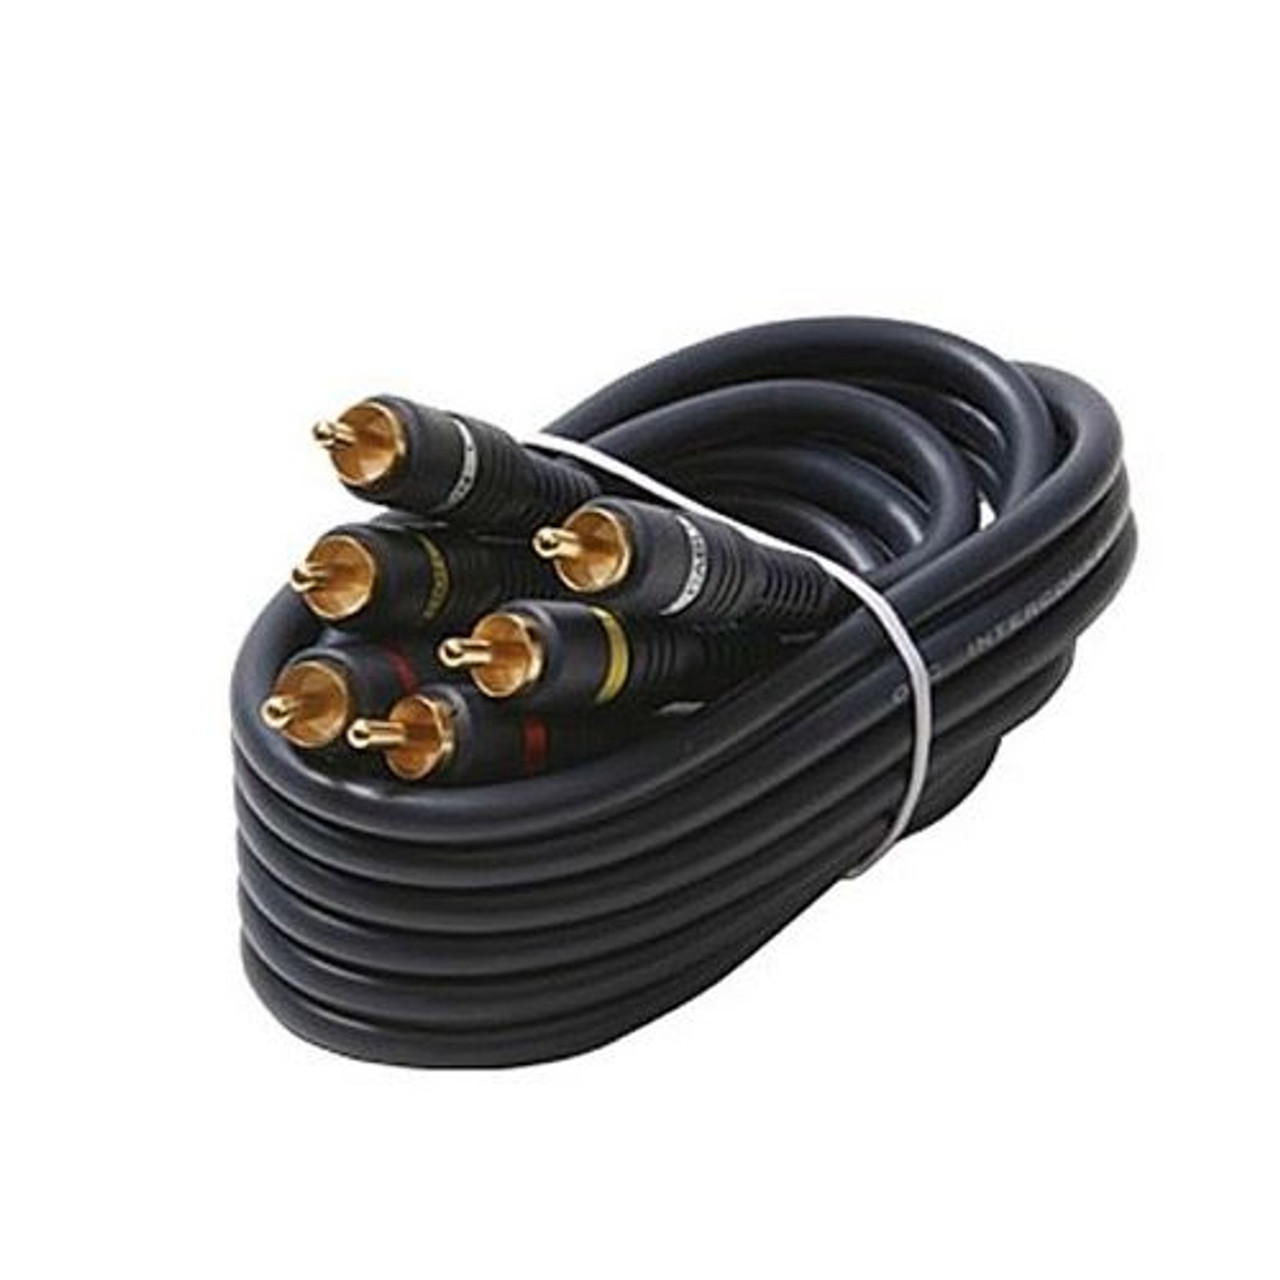 Eagle 50' FT 3 RCA Composite Cable Male to Male Python Gold Home Theater Audio Video Stereo Connectors Blue Shielded RCA Composite Cable